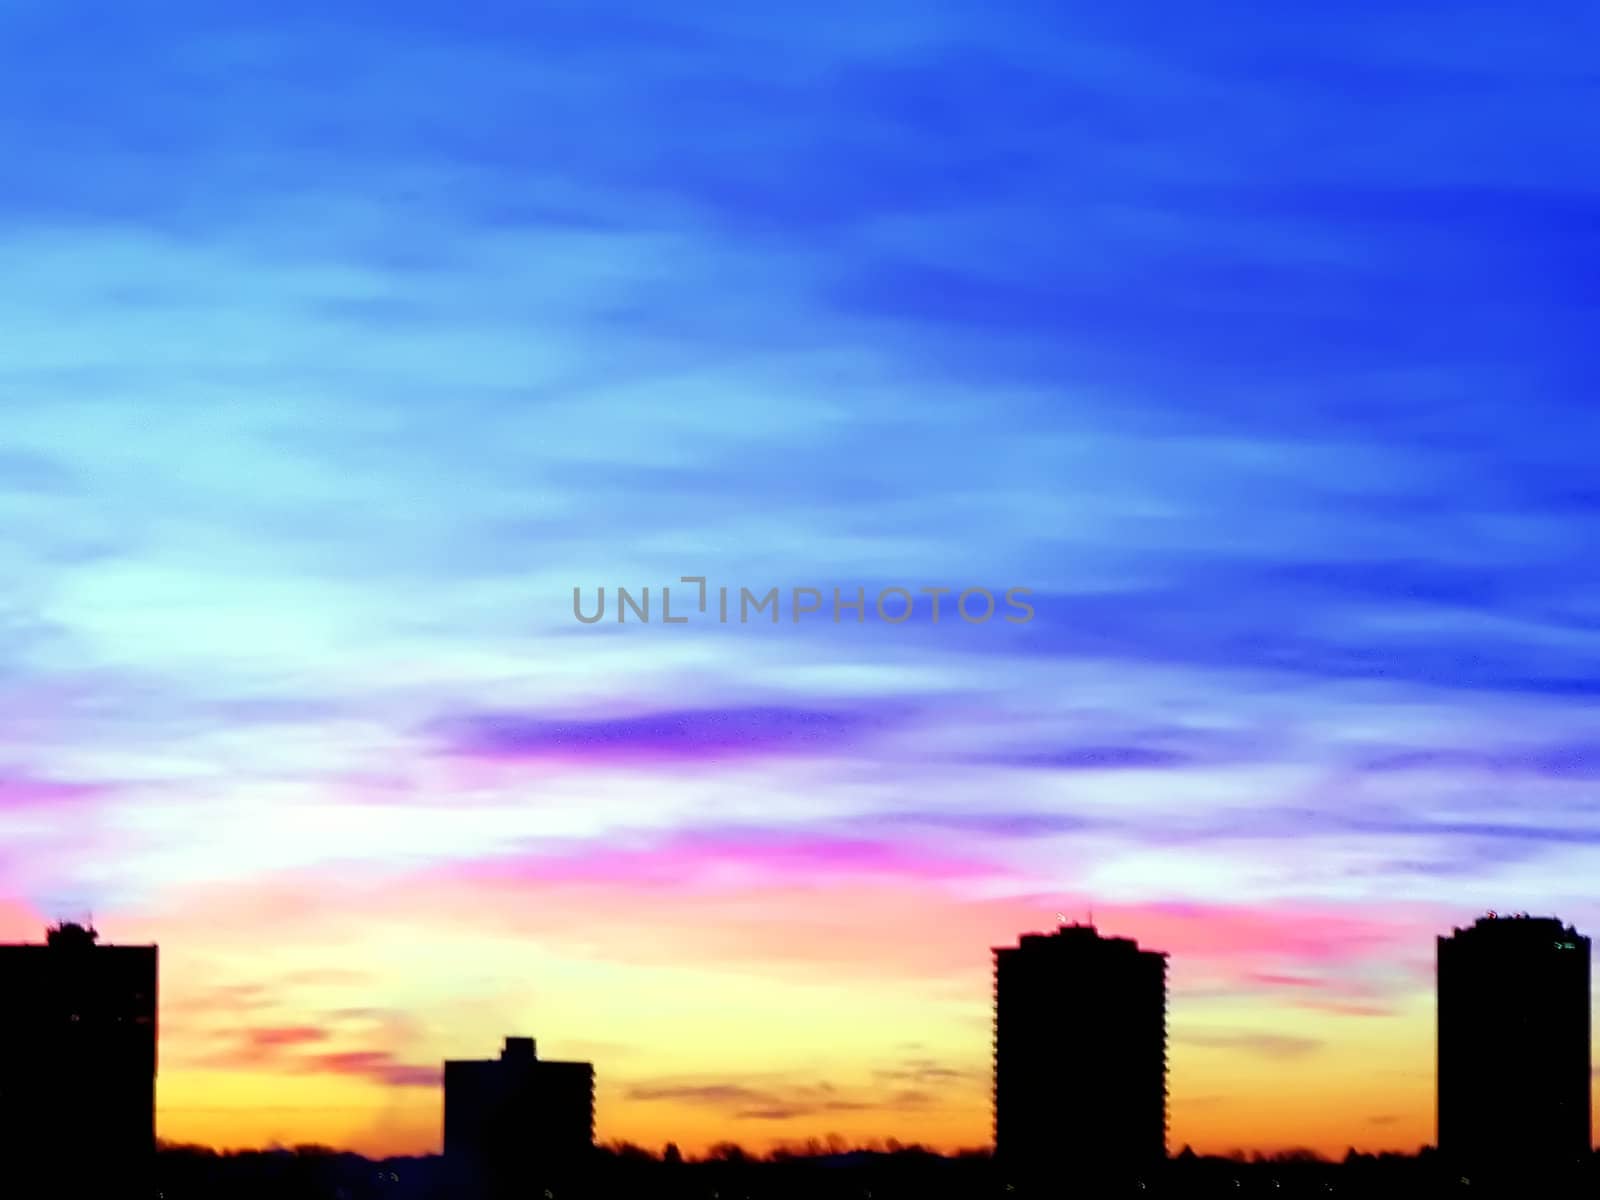 The silhouette of a city skyline on an array of sunset colors.